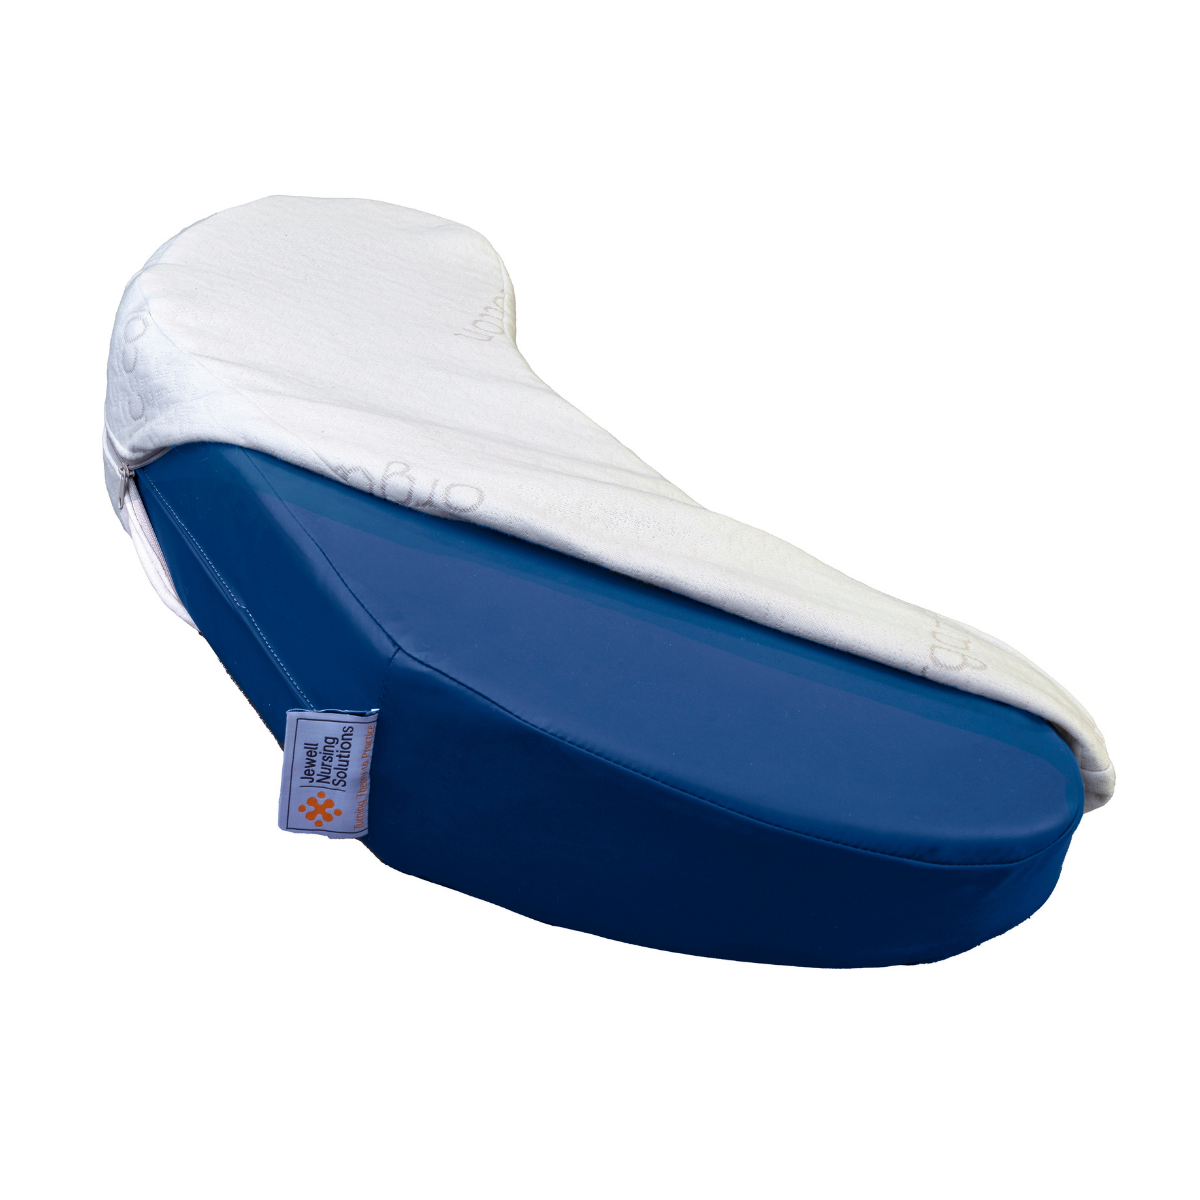 Kit includes one Bedsore Rescue Positioning Wedge Cushion for Home and one  Cotton Cover - Jewell Nursing Solutions